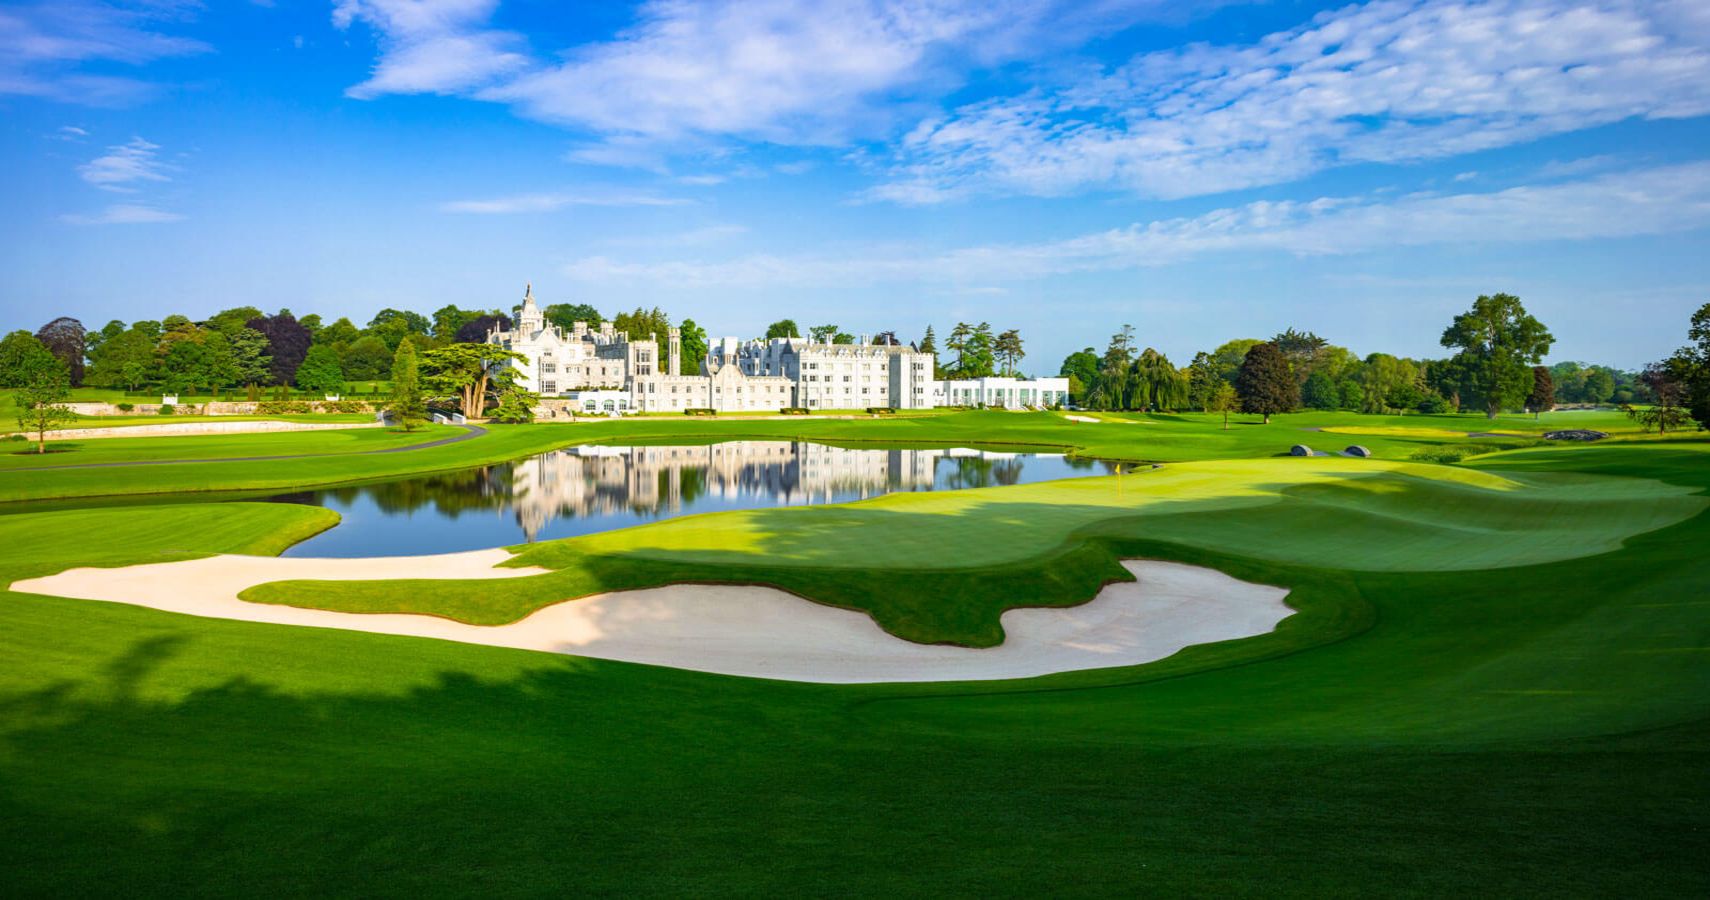 10 Of The Most Stunning Golf Courses In The World